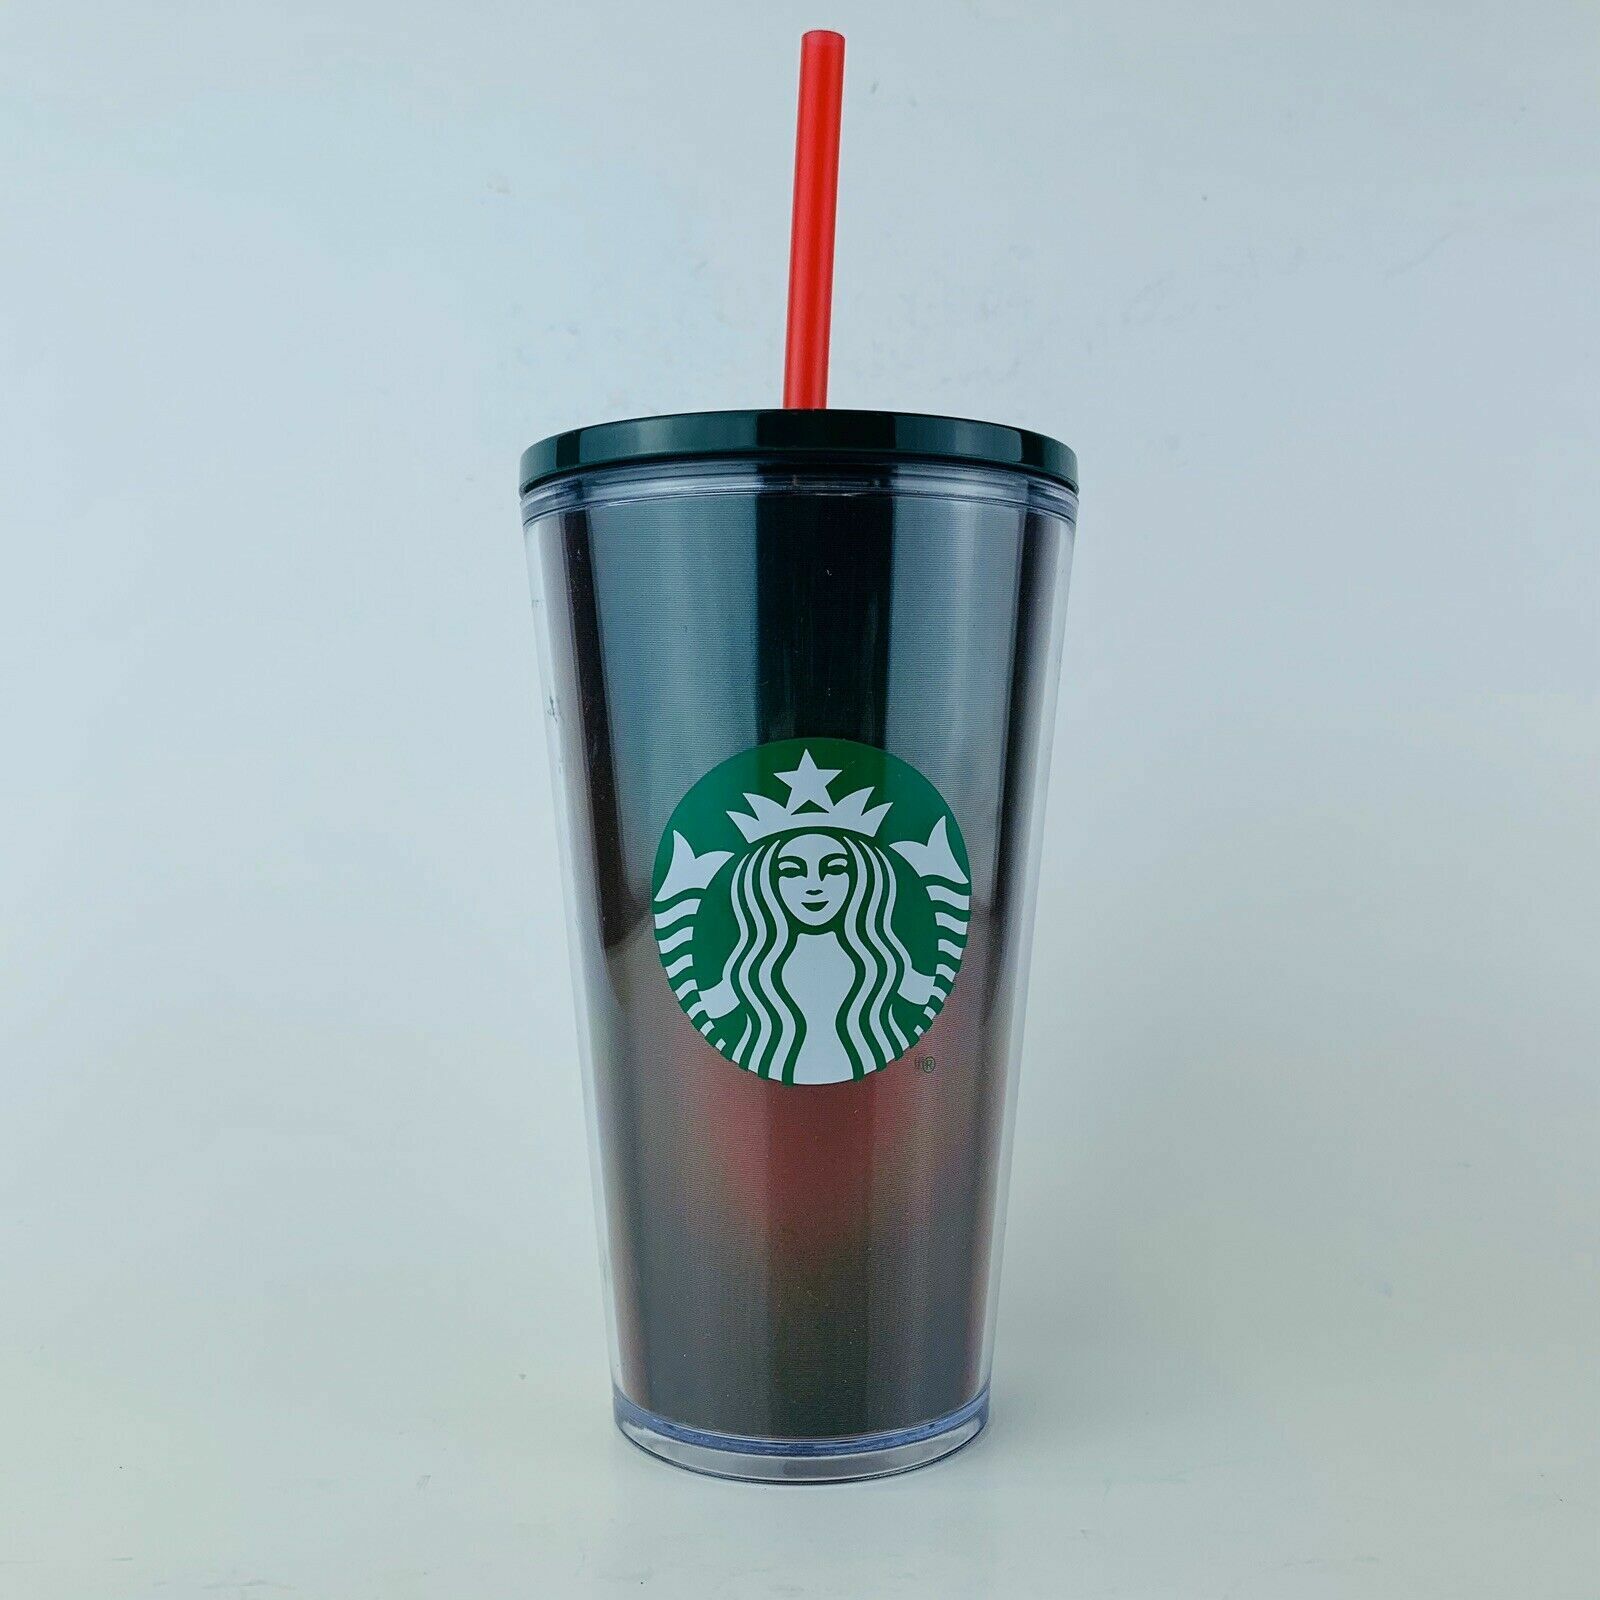 NEW Starbucks 2019 Red Green Holographic Winter Holiday Tumbler Cold Cup 16 oz